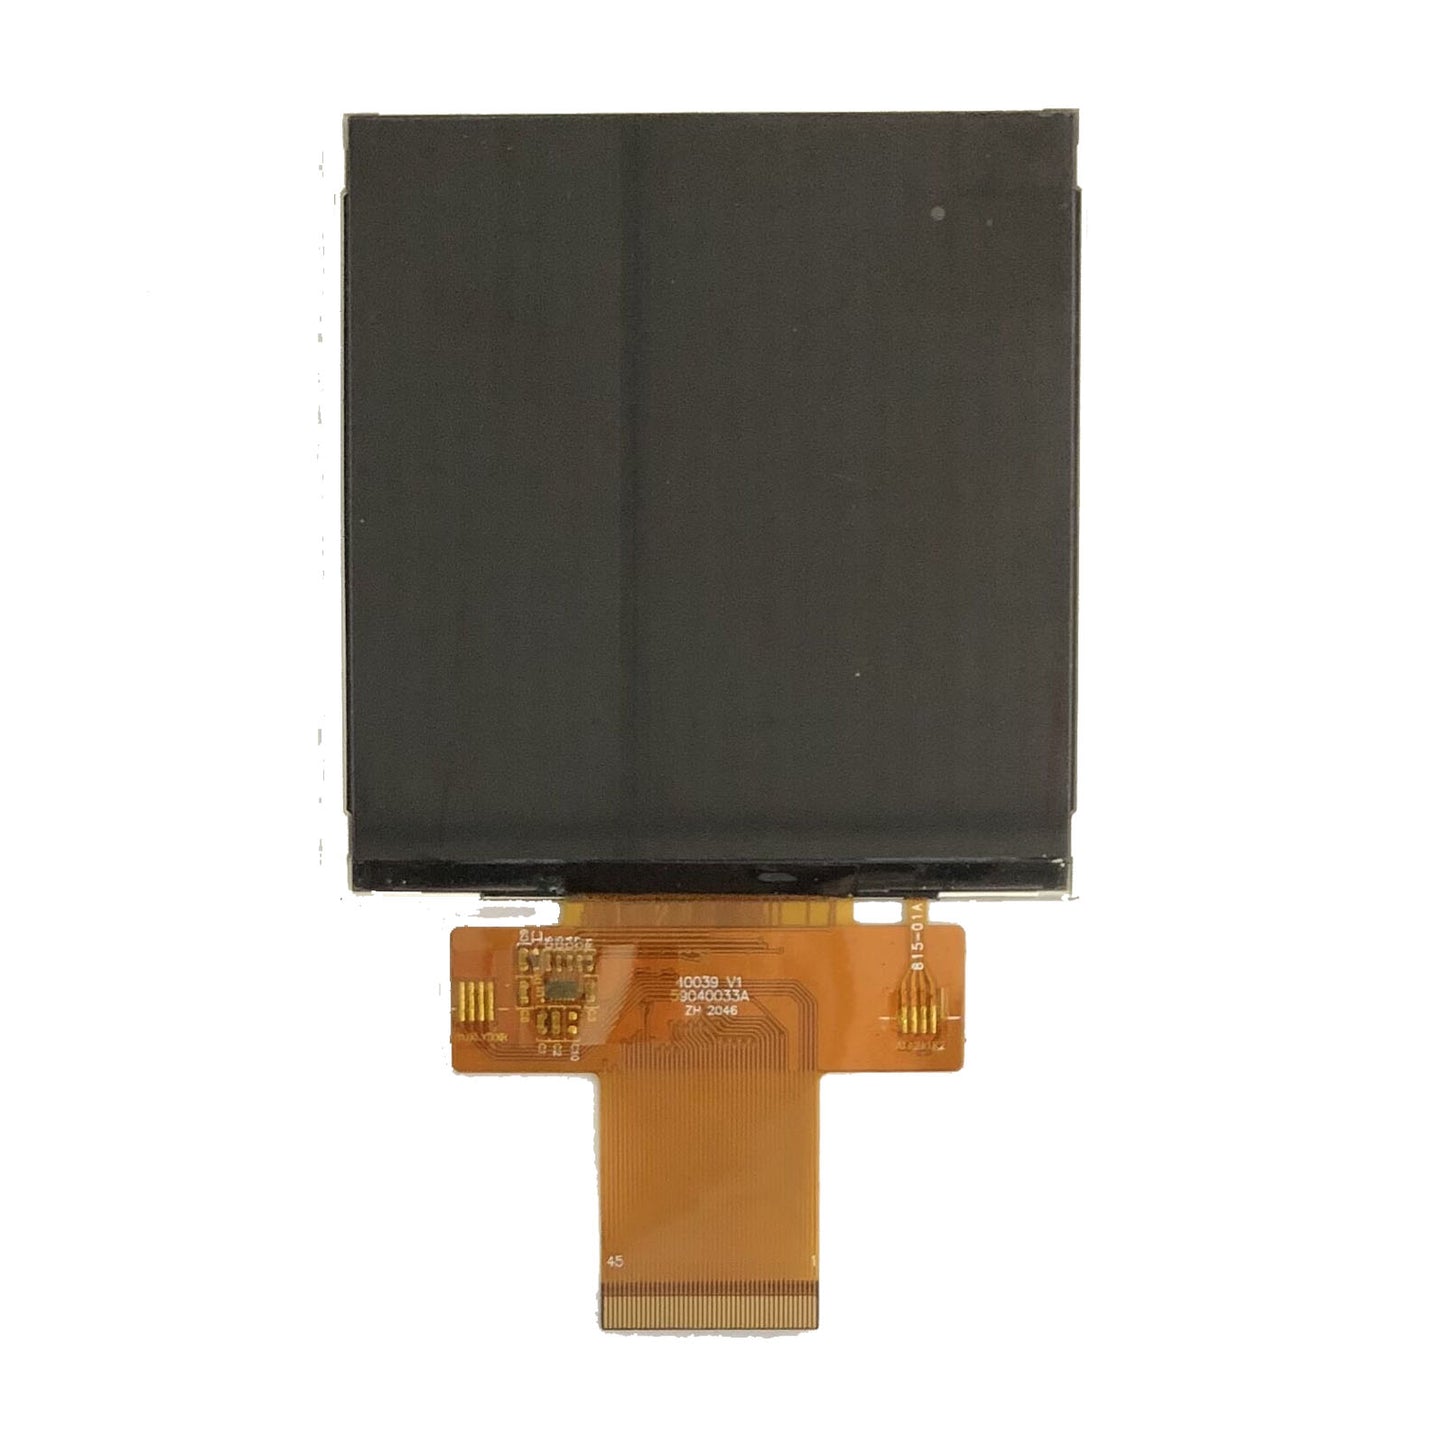 4.0-inch IPS display panel with 720x720 resolution, transmissive properties, supporting SPI and RGB interfaces